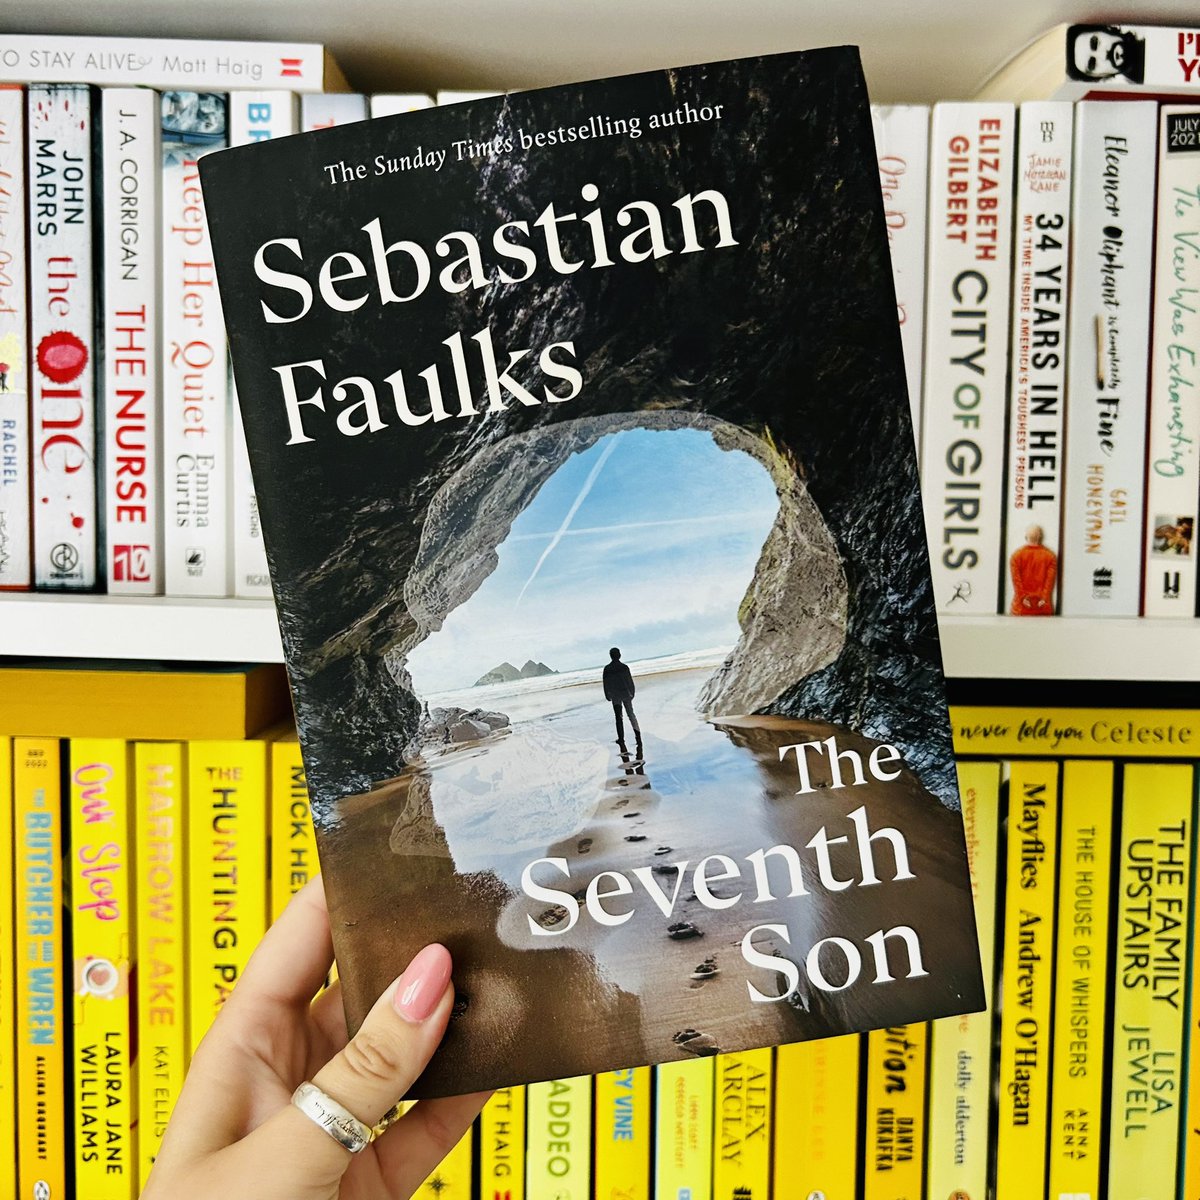 Thank you @najmafinlay for the copy of #TheSeventhSon by @SebastianFaulks 😍

Out 7th September ✨

@HutchHeinemann #BookBlogger #Books #Reading